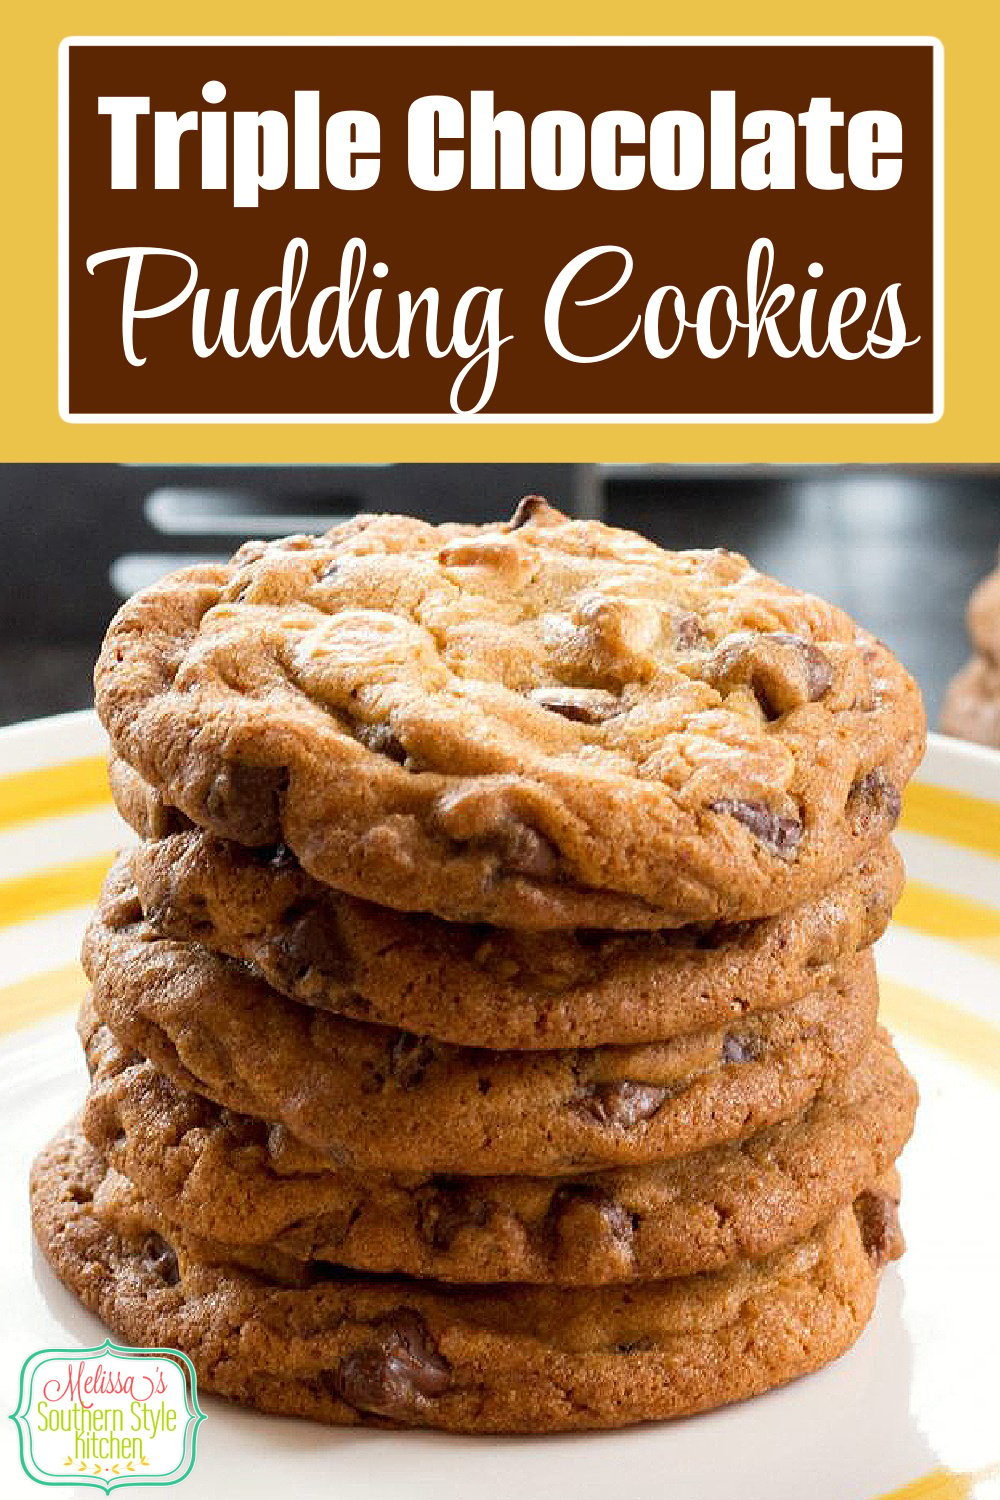 These addictive Triple Chocolate Chip Pudding Cookies won't last long in your cookie jar! #chocolatechipcookies #puddingcookies #cookies #cookierecipes #holidaybaking #christmascookies #cookie #chocolate #desserts #dessertfoodrecipes #southernfood #southernrecipes #triplechocolatechipcookies #bestcookierecipes via @melissasssk